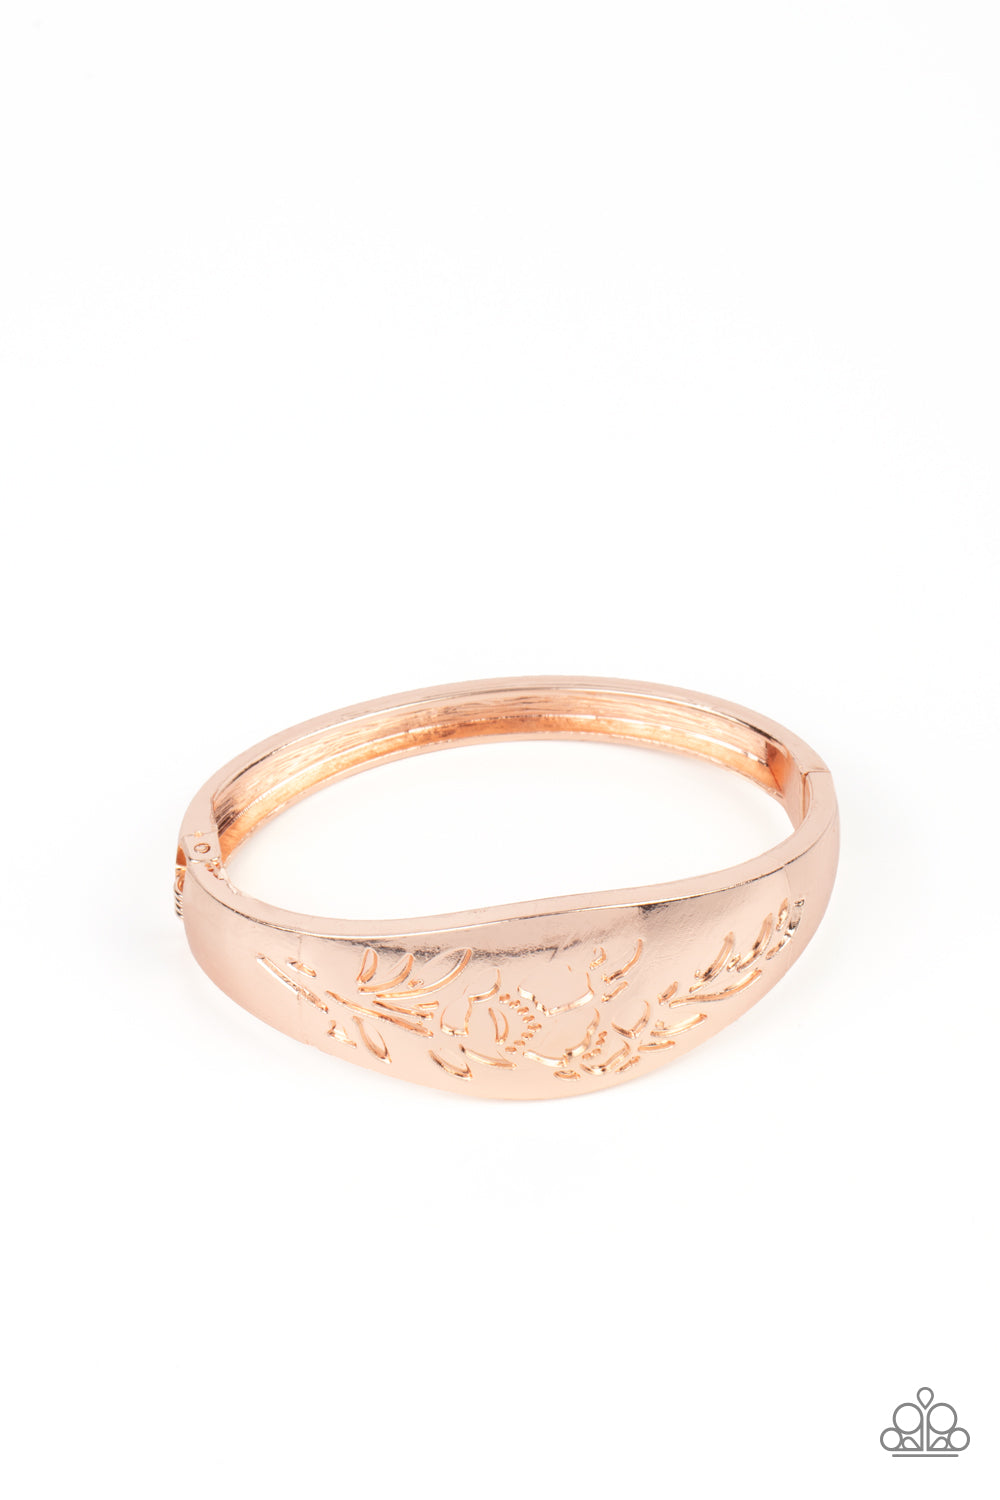 Fond of Florals Rose Gold Bracelet - Paparazzi Accessories  The front of a thick rose gold bangle-like bracelet is stamped in a leafy floral pattern, creating a whimsy centerpiece around the wrist. Features a hinged closure.  All Paparazzi Accessories are lead free and nickel free!  Sold as one individual bracelet.